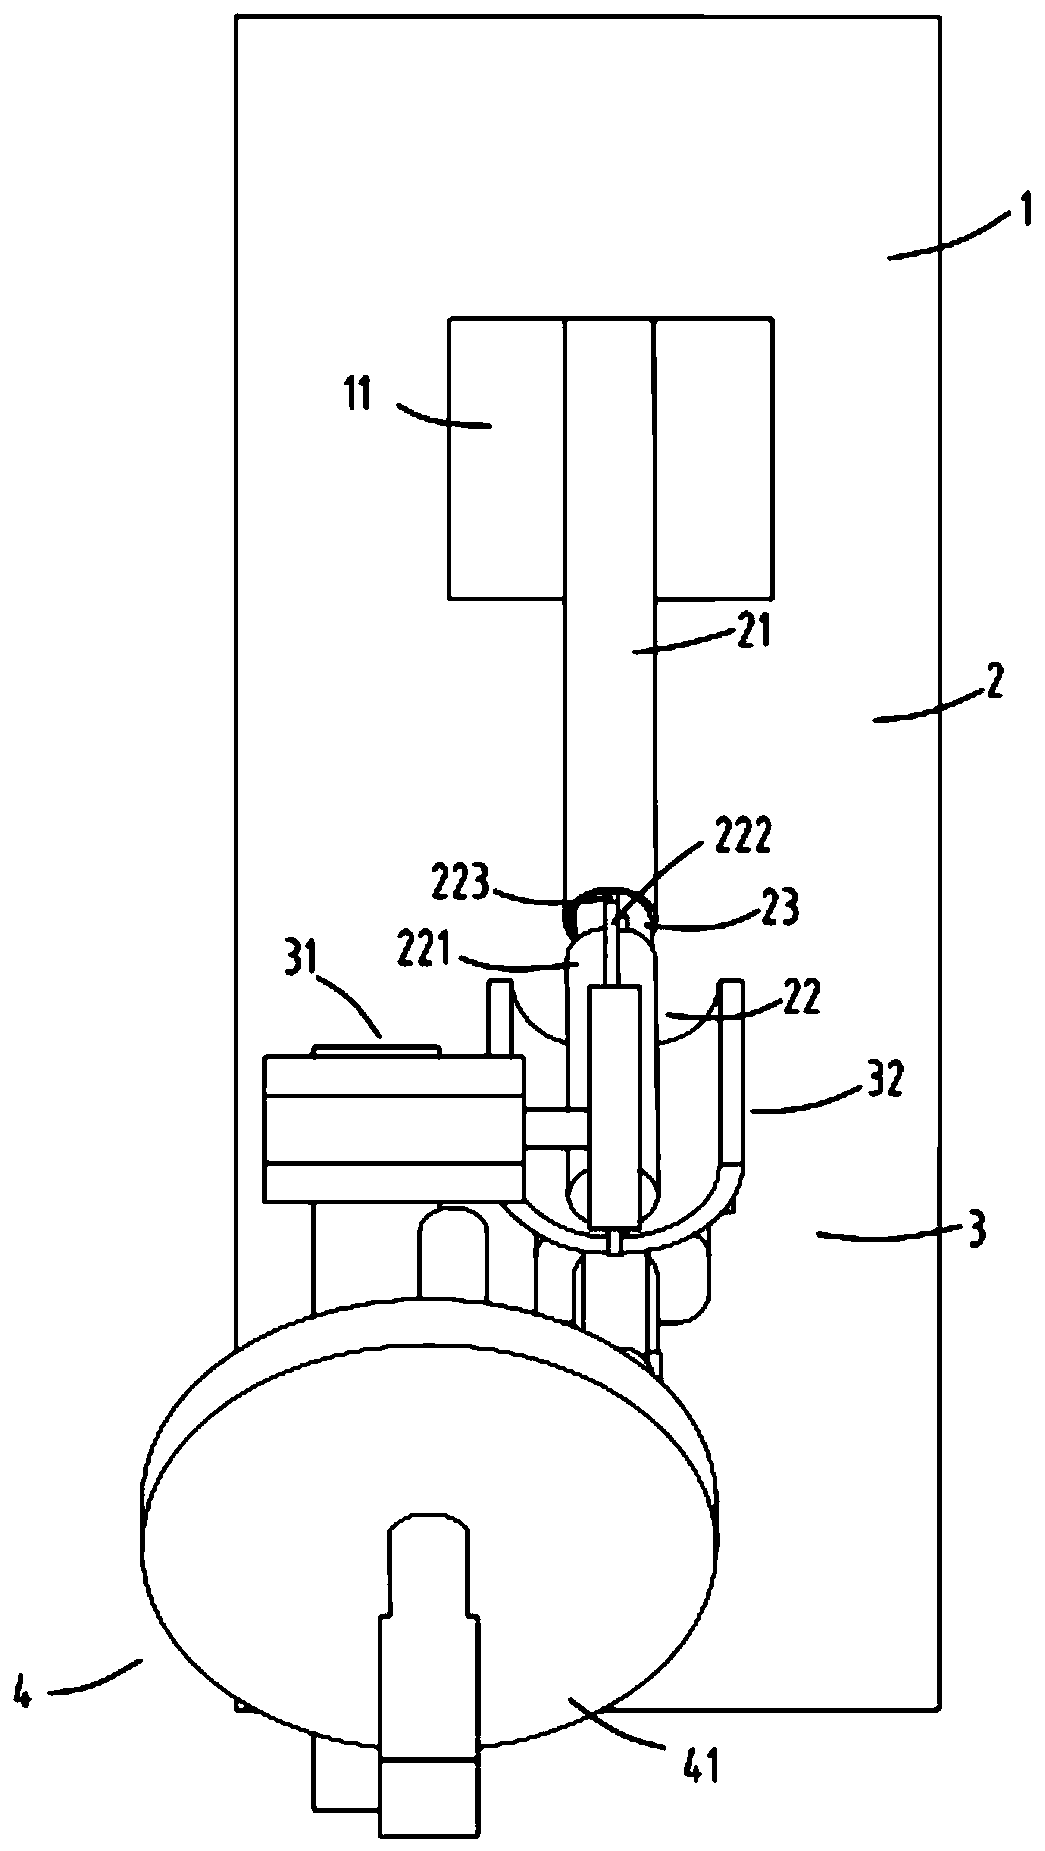 A device for arranging gaps in material shifting rods and grinding gaps